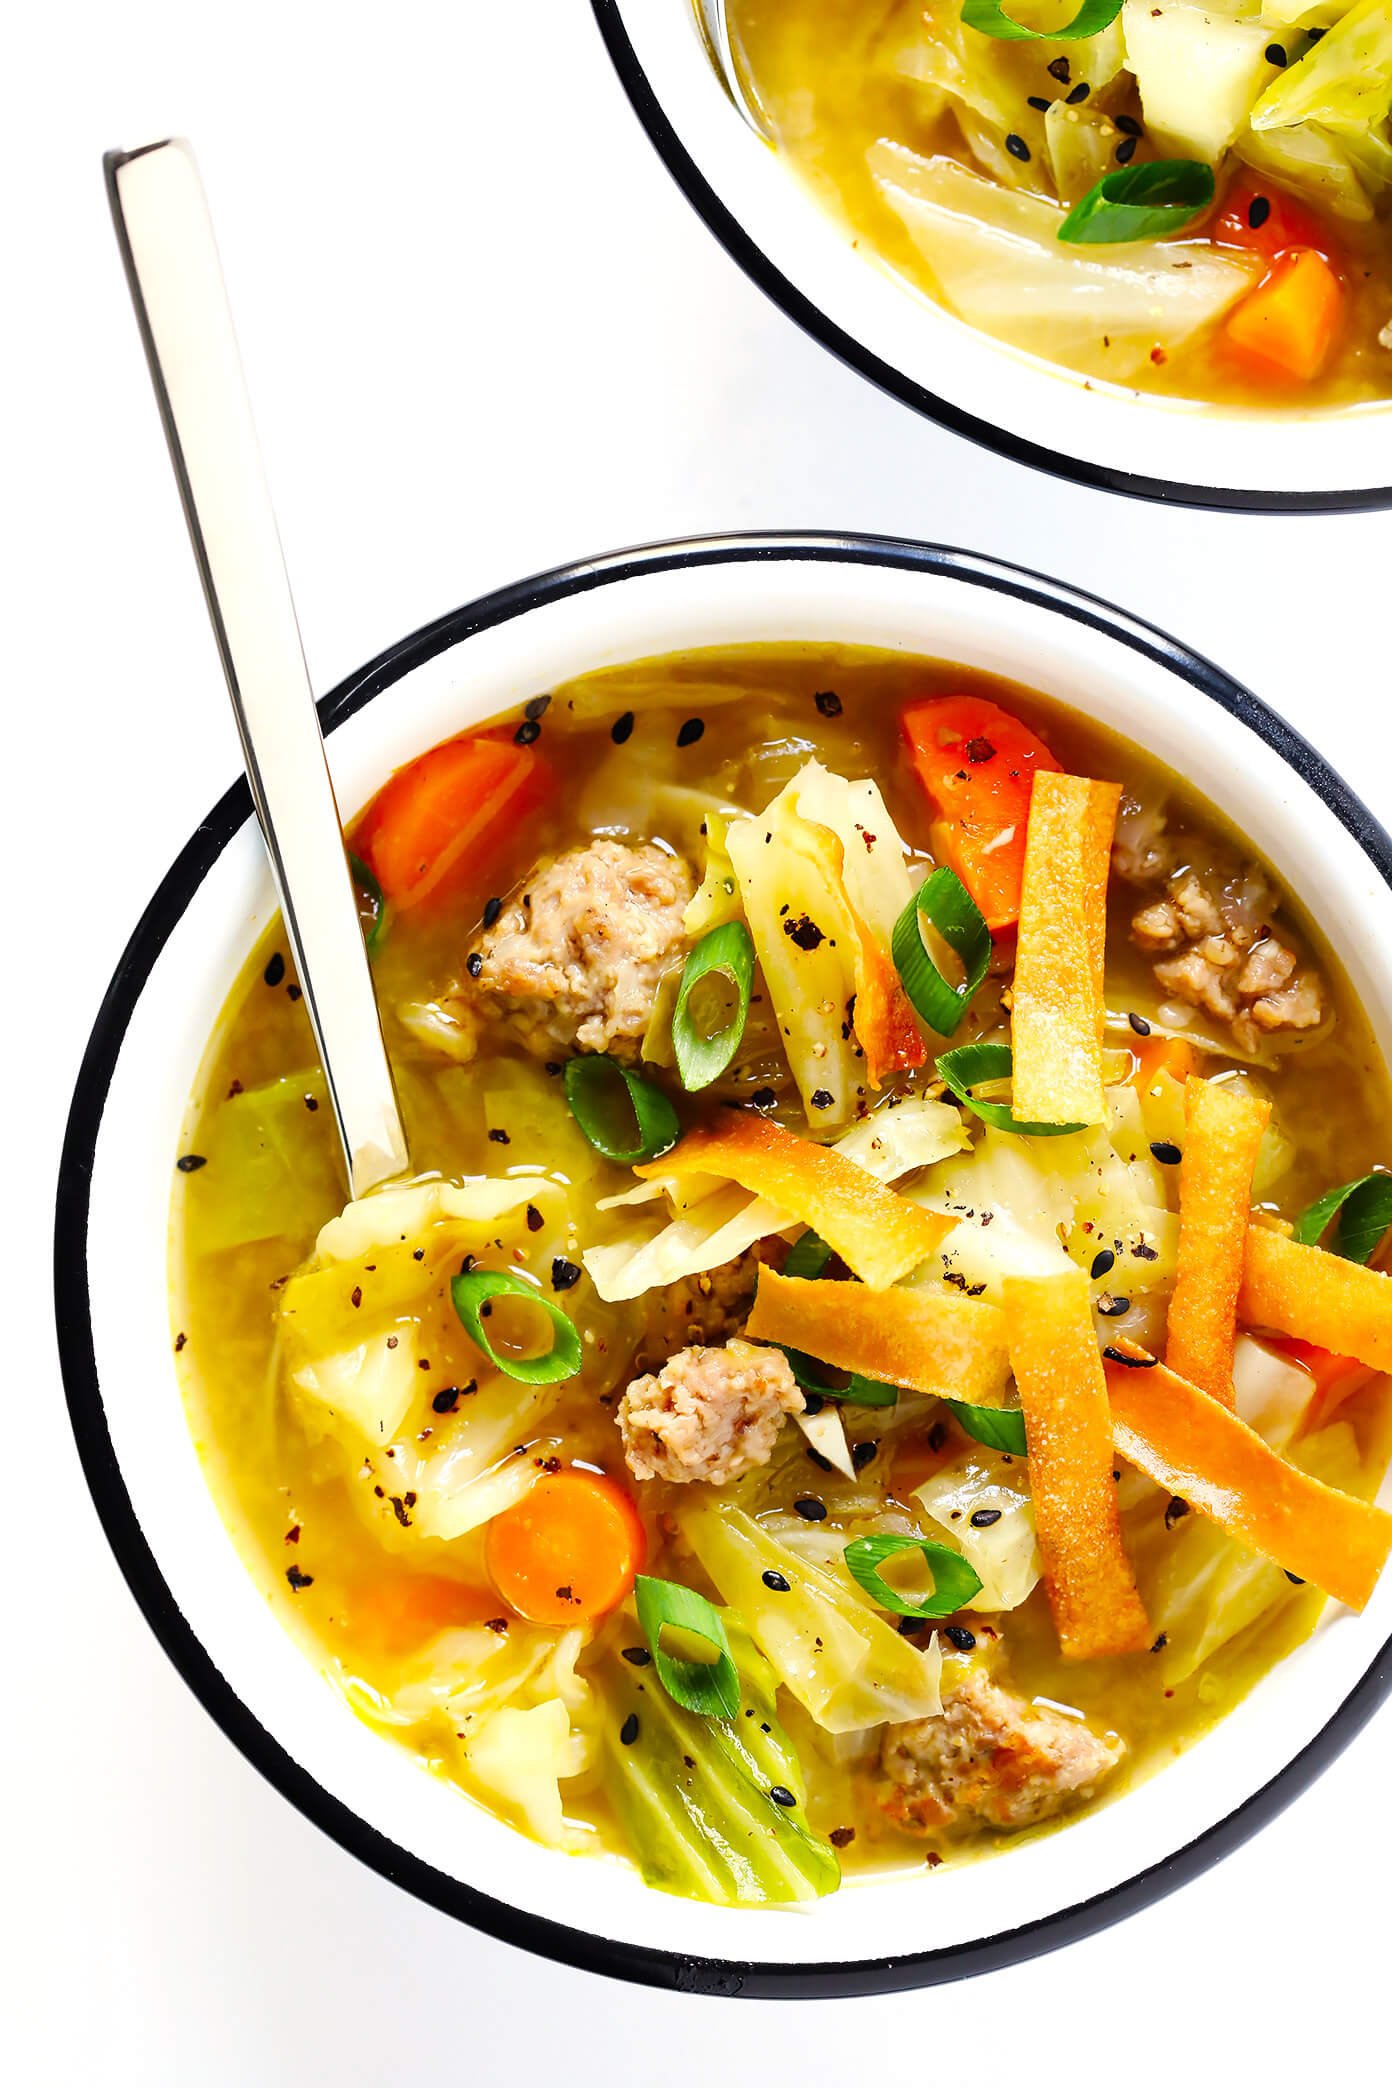 This Egg Roll Soup recipe is SO tasty!! It's basically an Asian cabbage soup, simmered with zesty sausage, carrots, sesame and ginger, and topped with crispy wonton strips if desired. It's the perfect easy dinner recipe. | Gimme Some Oven #glutenfree #soup #recipe #gf